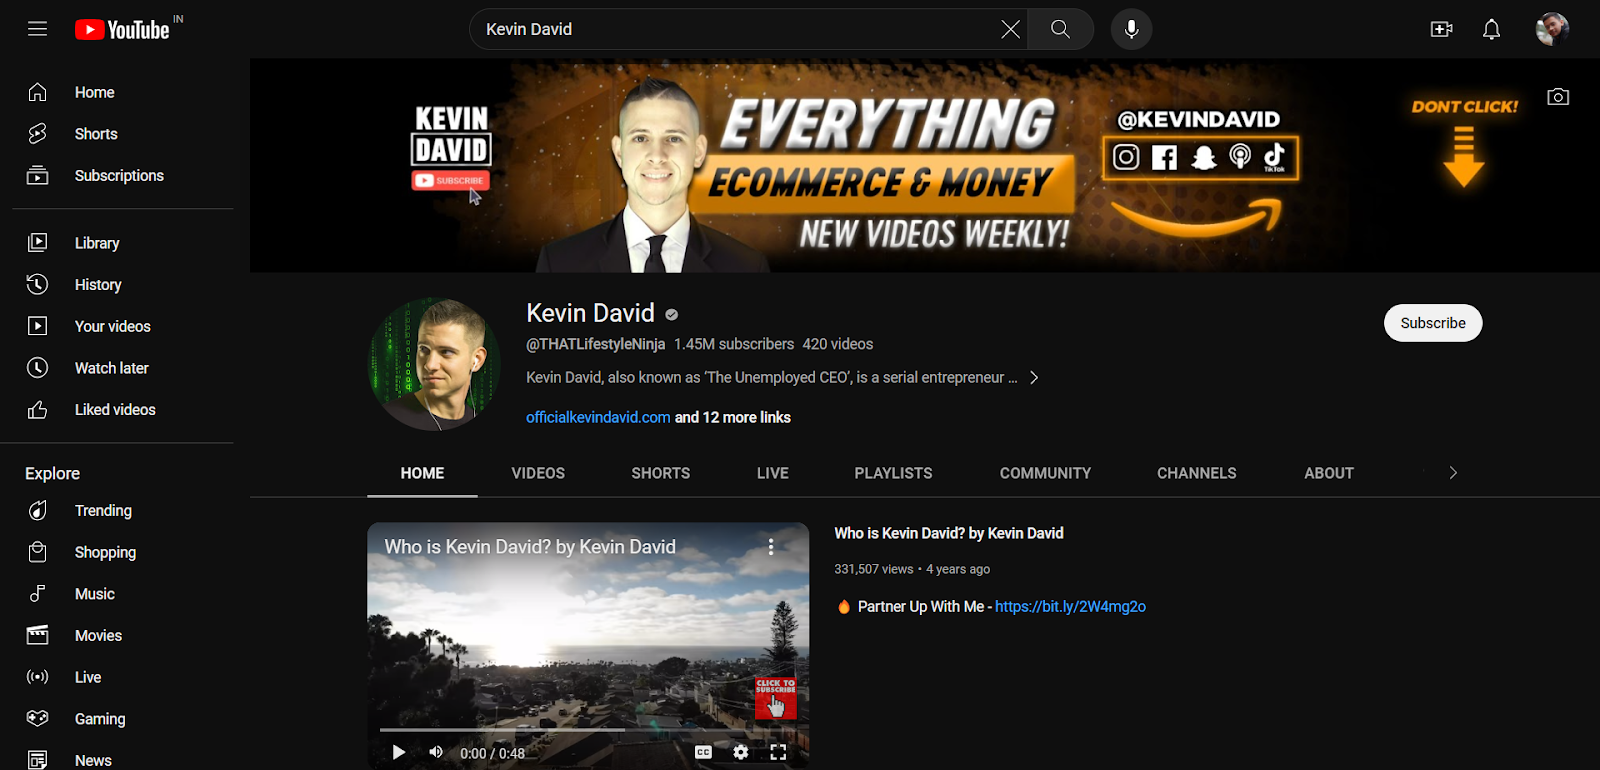 Kevin David's YouTube channel